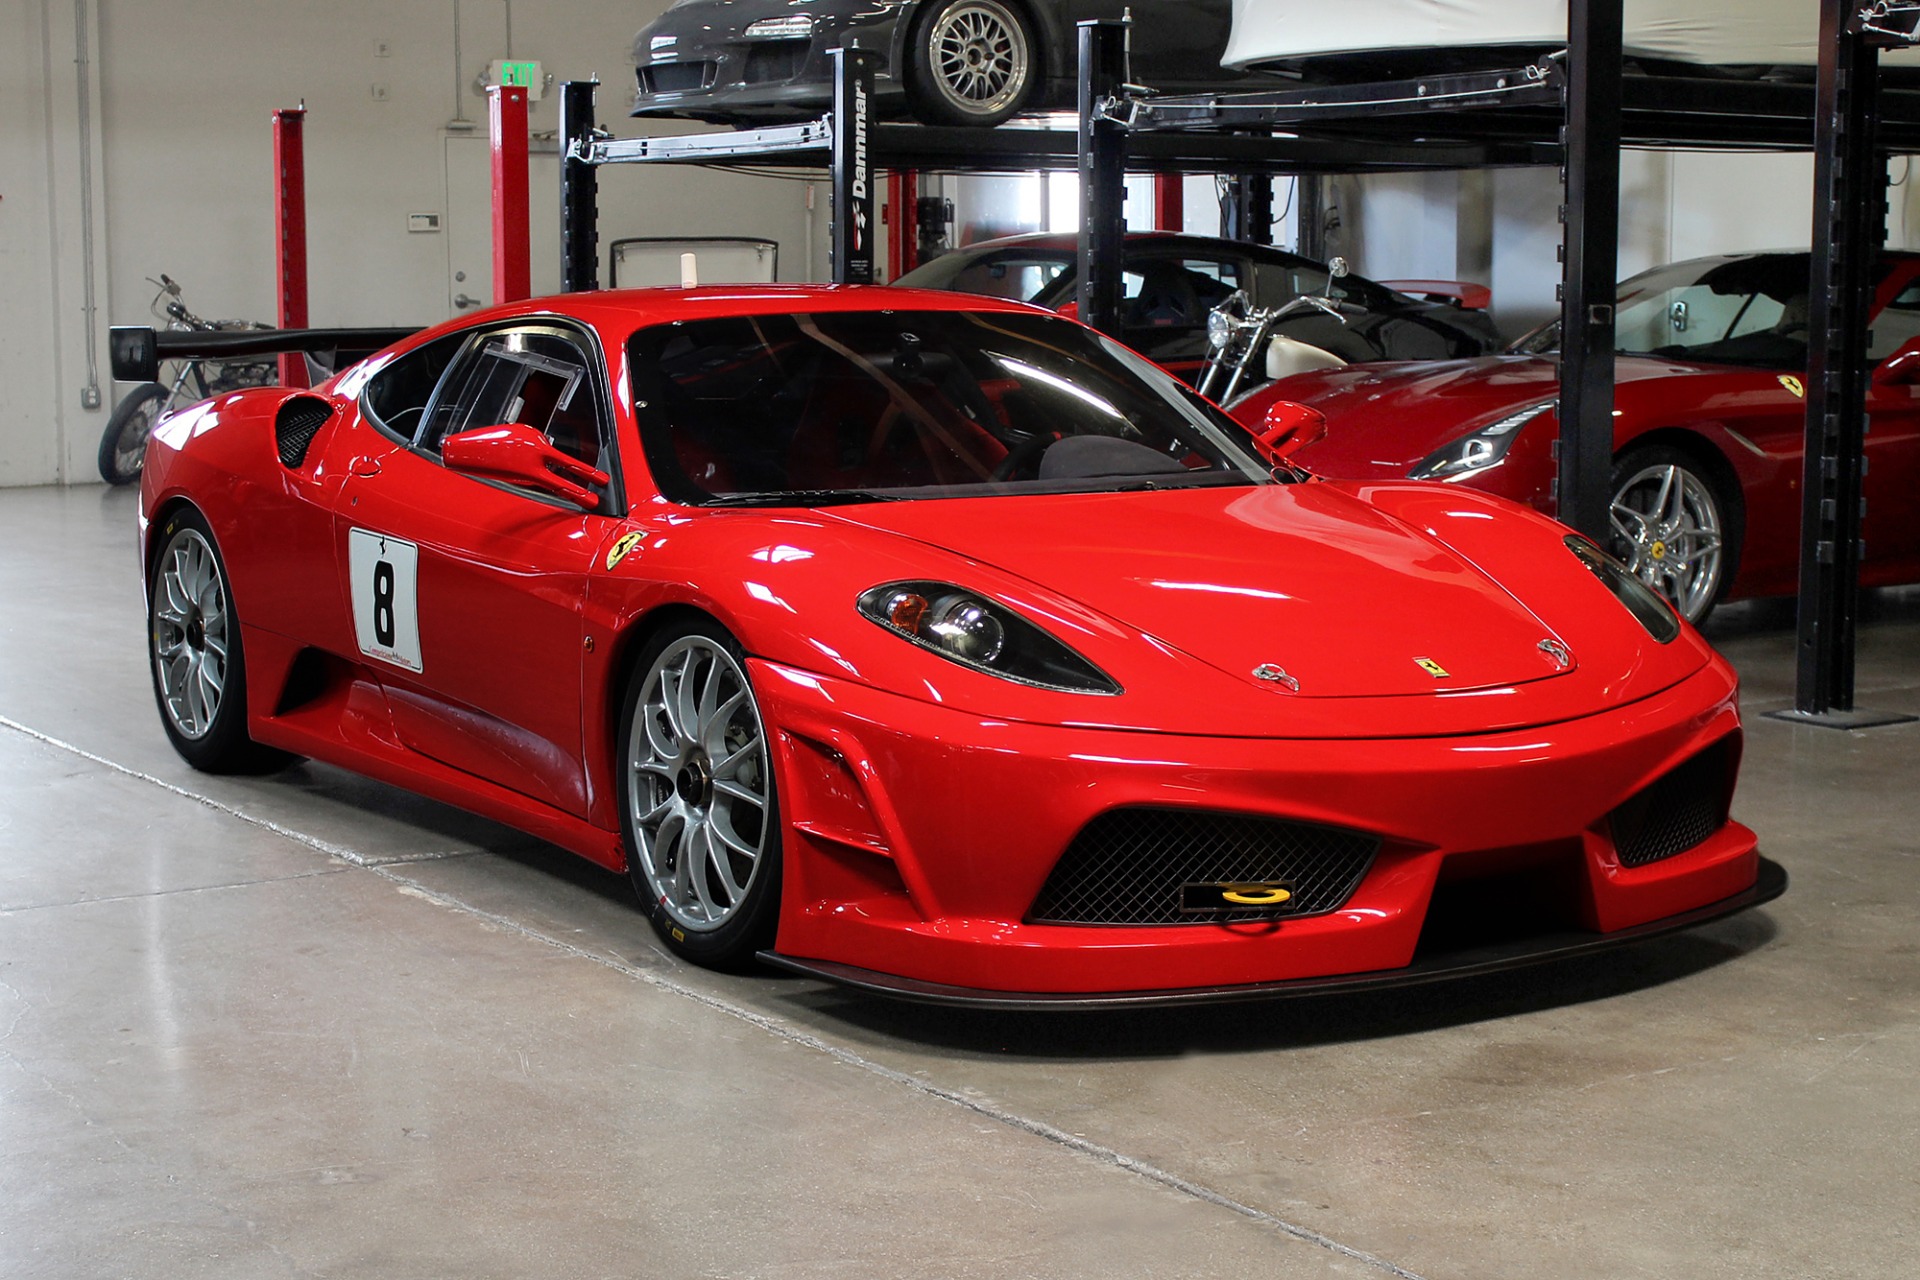 Used 2005 Ferrari 430 Challenge for sale Sold at San Francisco Sports Cars in San Carlos CA 94070 1